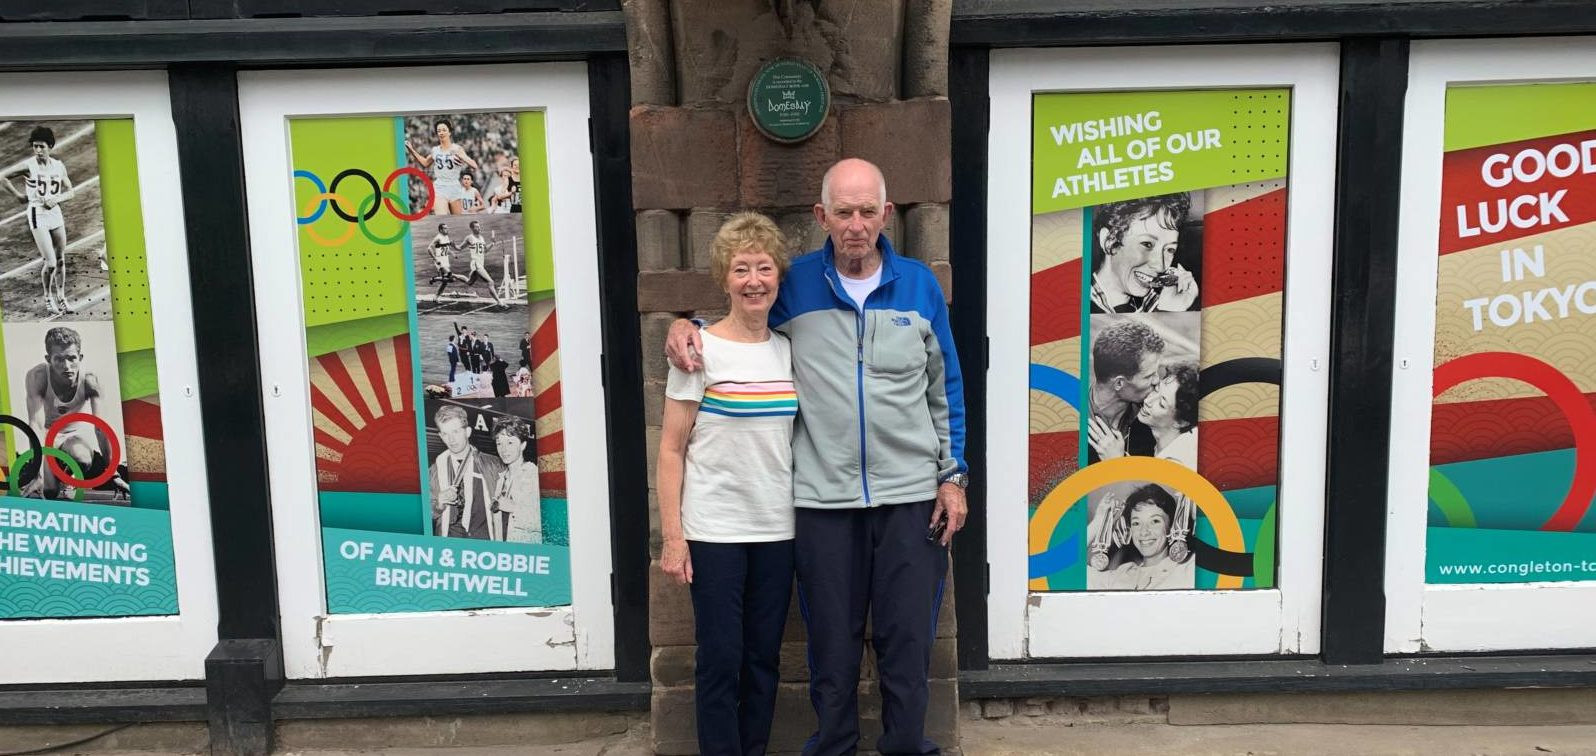 Robbie Brightwell and Ann Packer were Britain's golden couple after winning Olympic medals at Tokyo 1964 ©Congleton Town Council